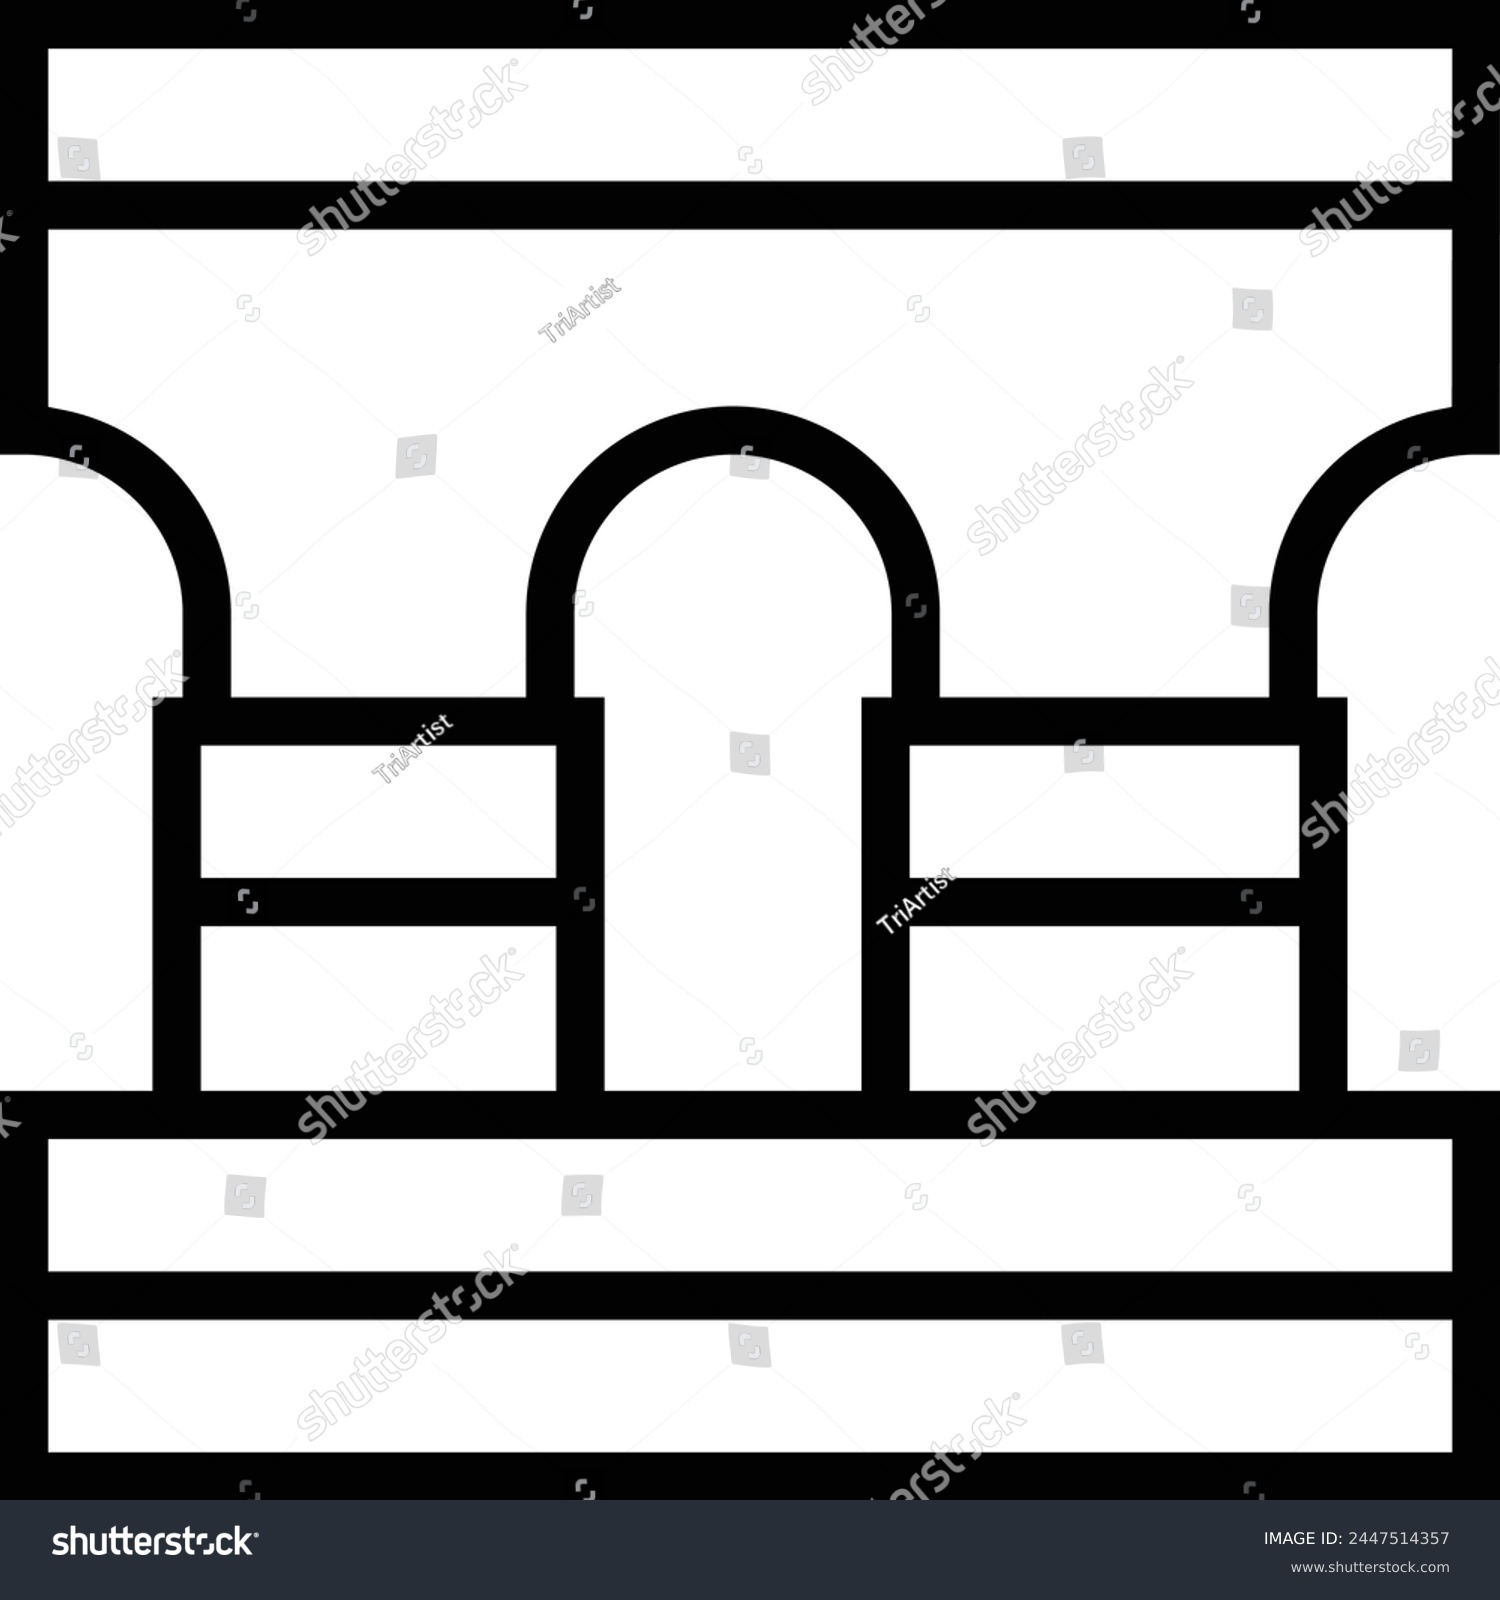 SVG of aqueduct icon. Thin linear style design isolated on white background svg